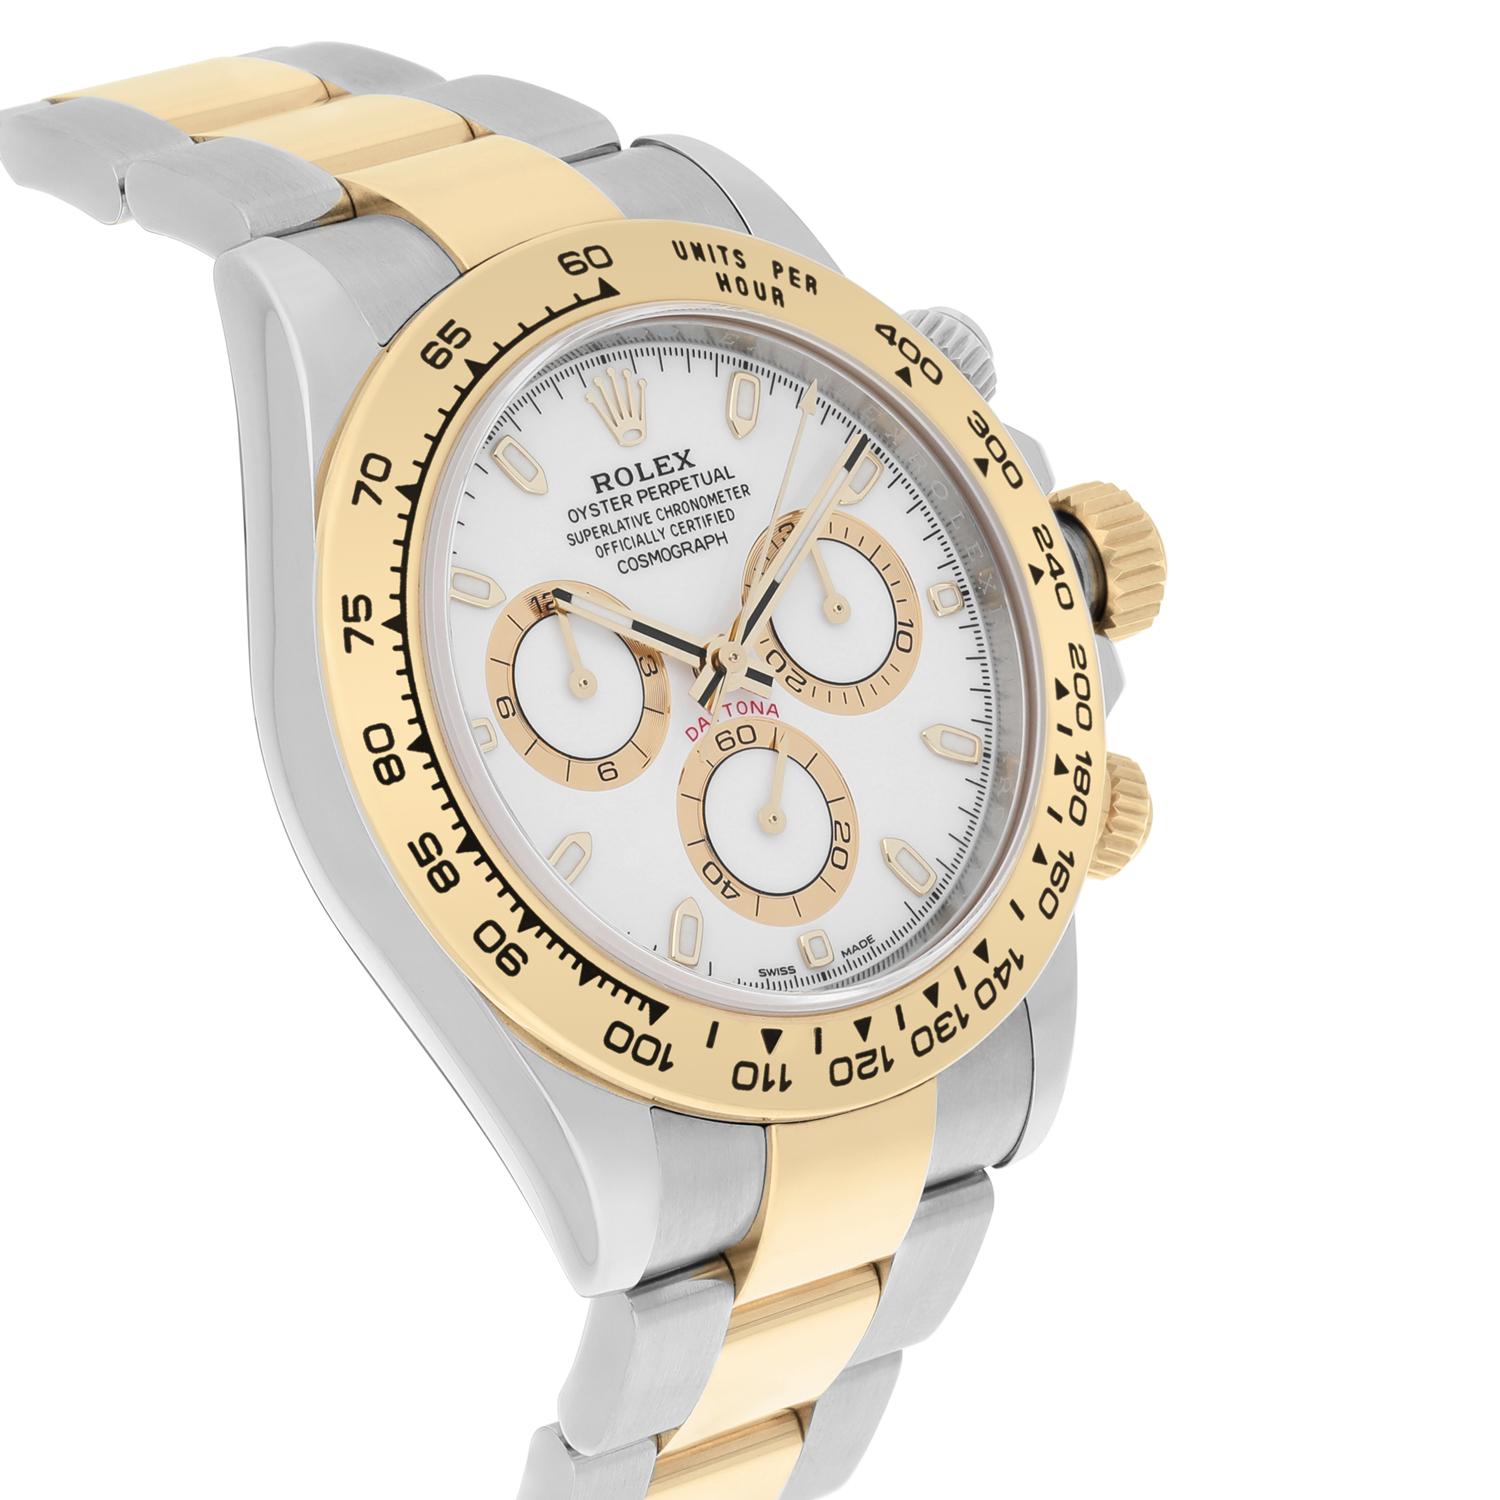 Rolex Cosmograph Daytona Stainless Steel/Yellow Gold White Dial Watch 116503 In Excellent Condition For Sale In New York, NY